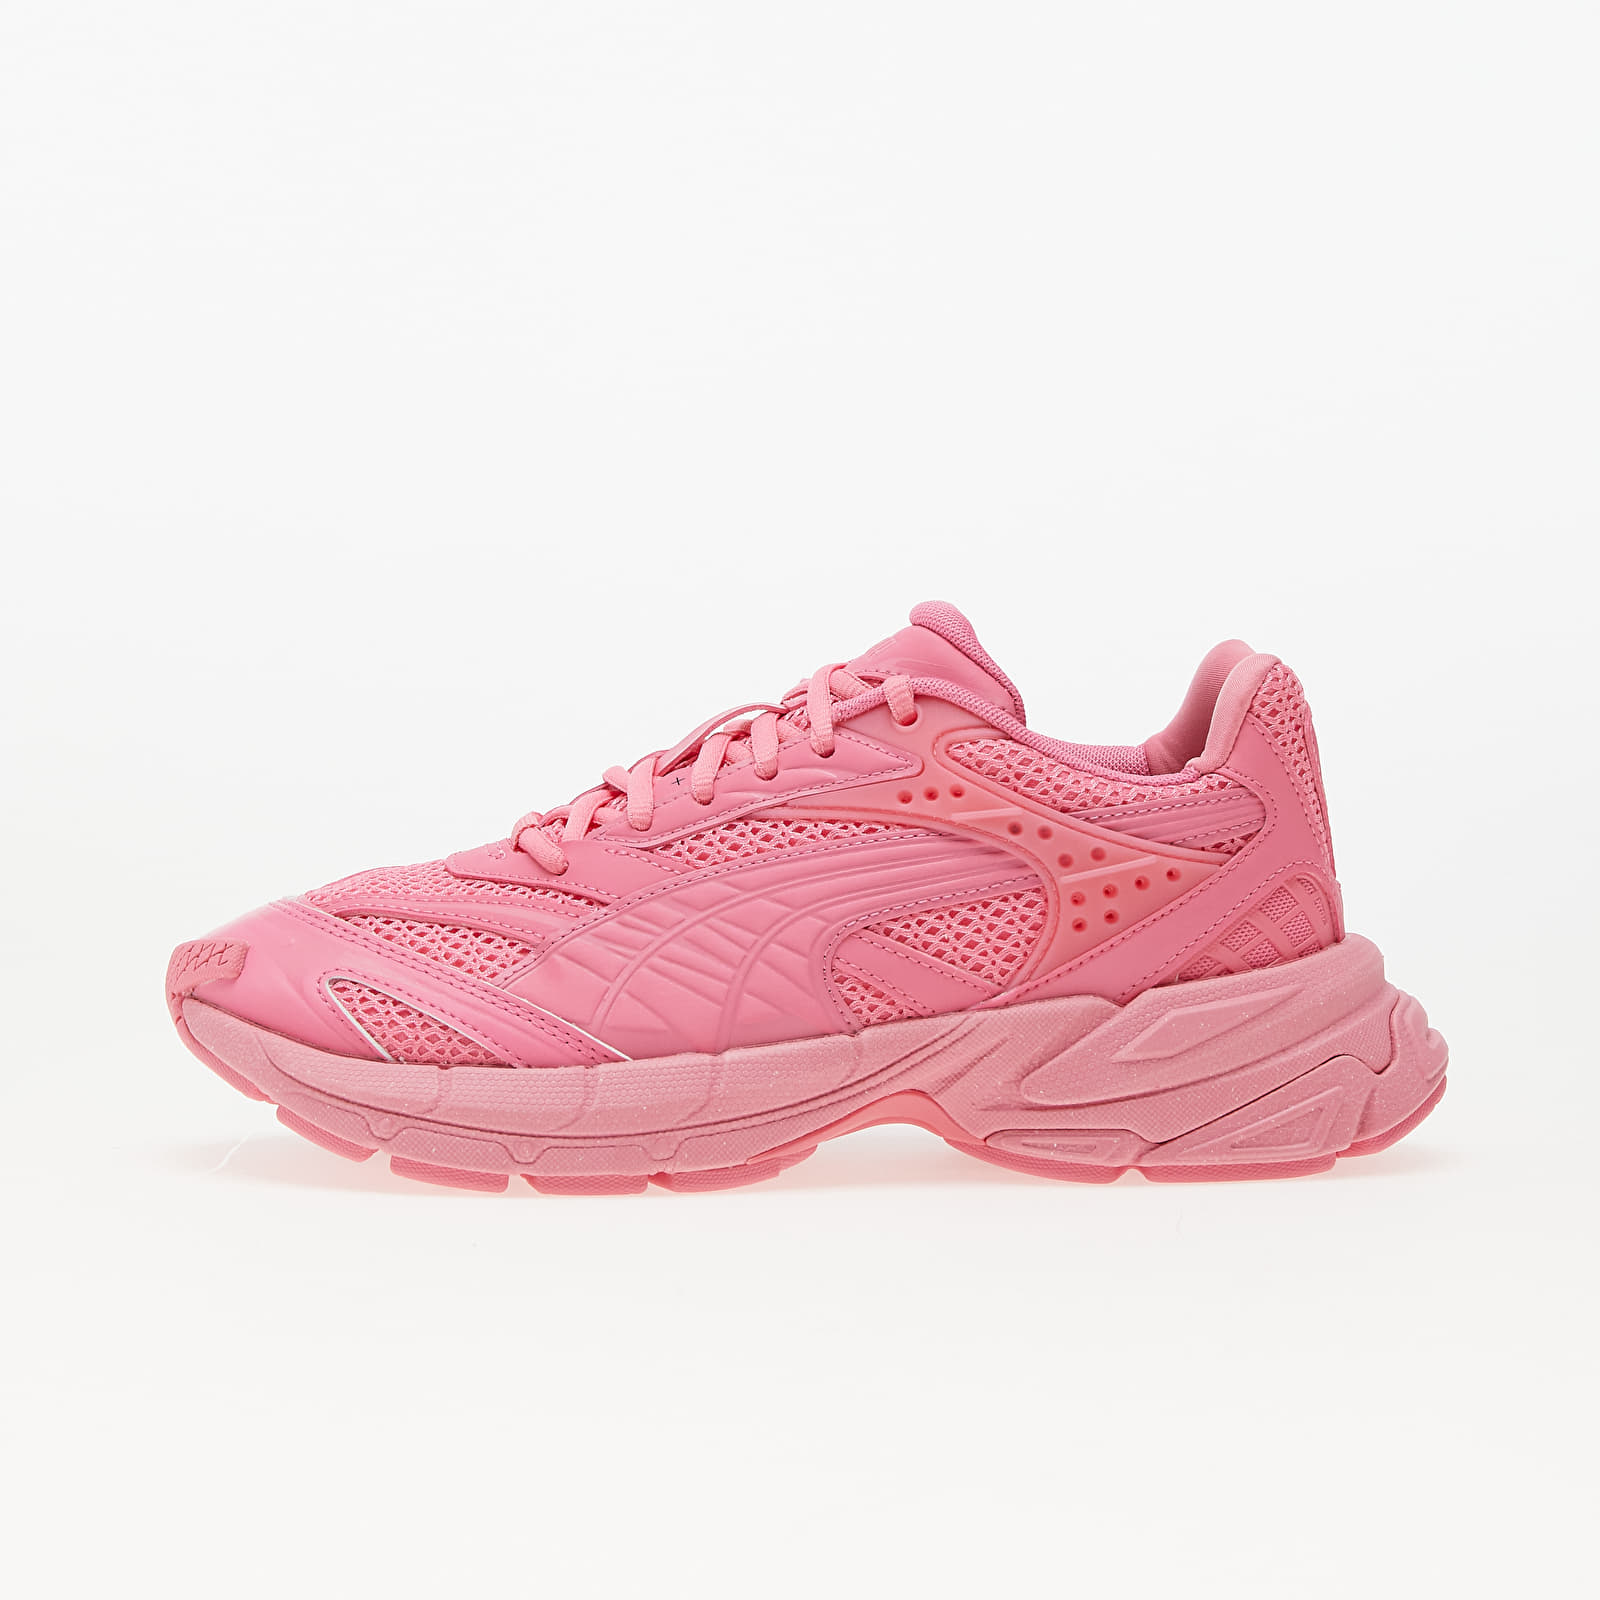 Men's sneakers and shoes Puma Velophasis Technisch Pink